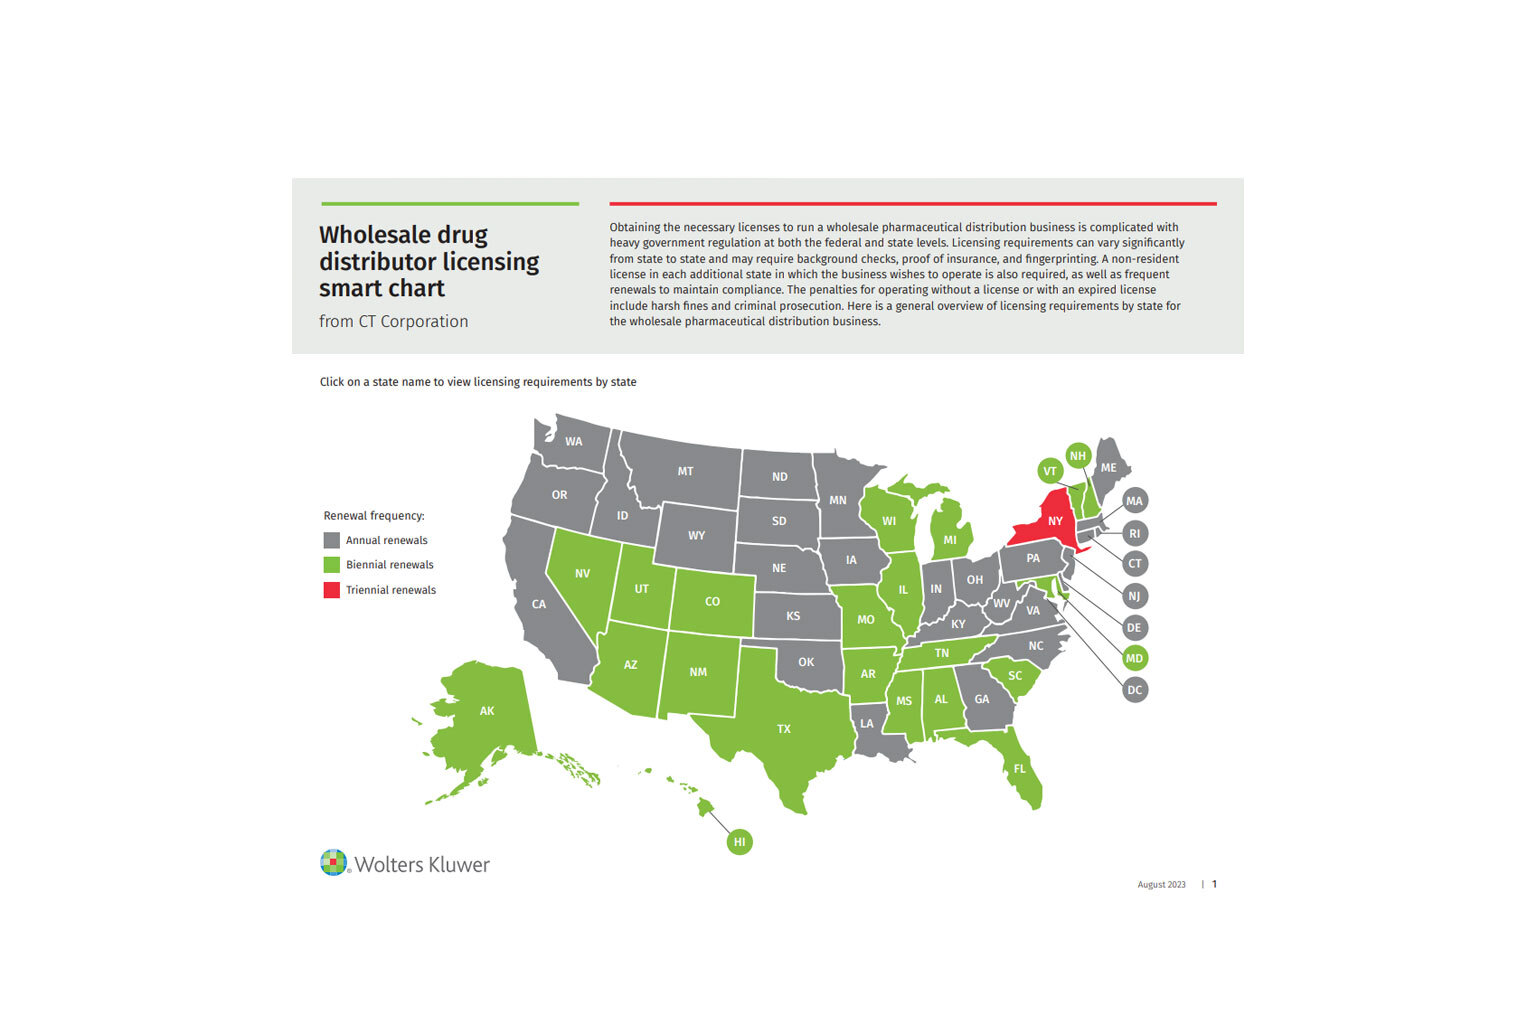 Wholesale drug distributor licensing requirements smart chart from CT Corporation